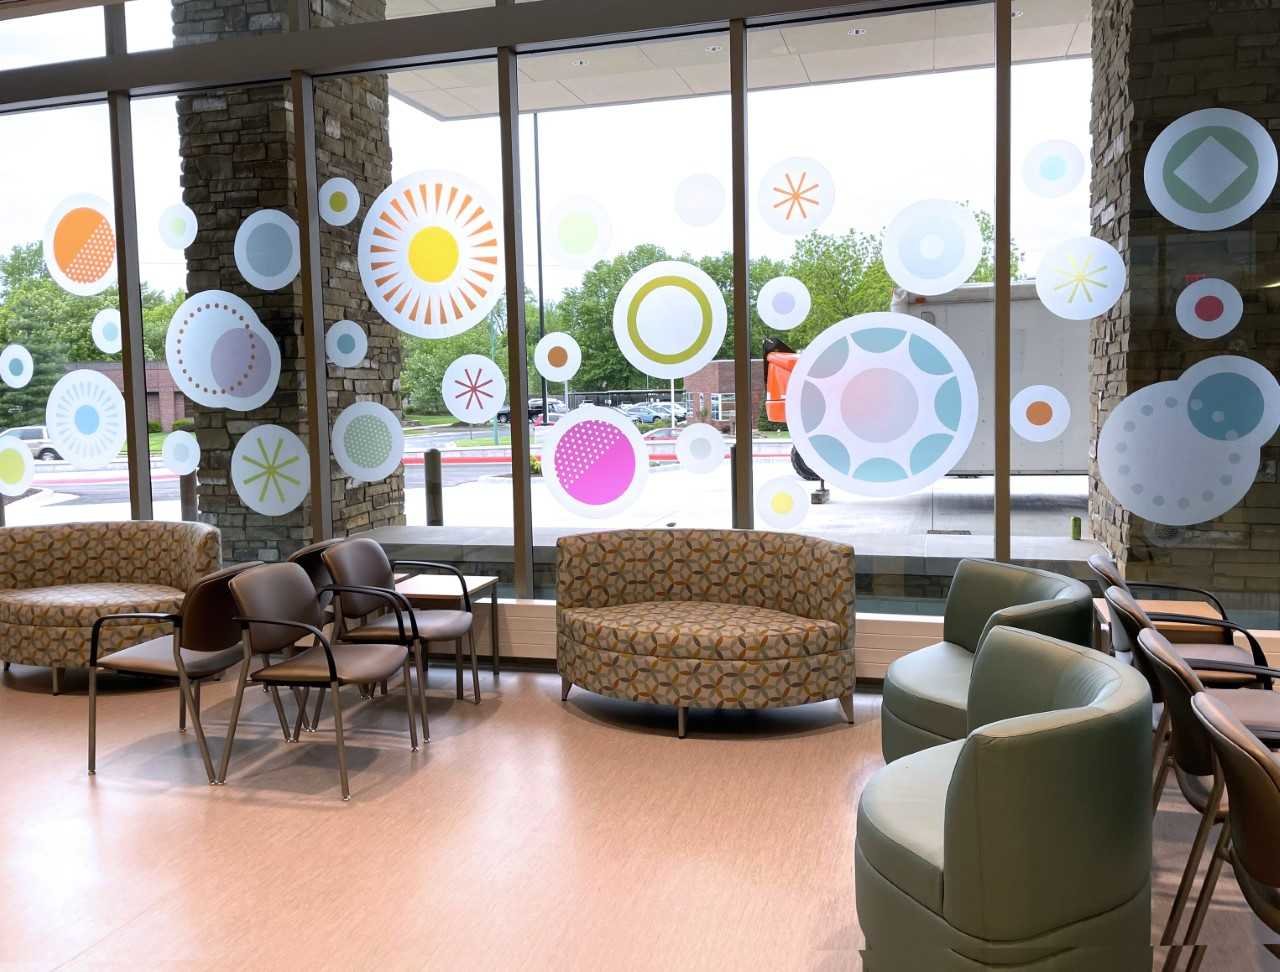 Mercy Kids' new emergency room is designed to decrease anxiety for children.